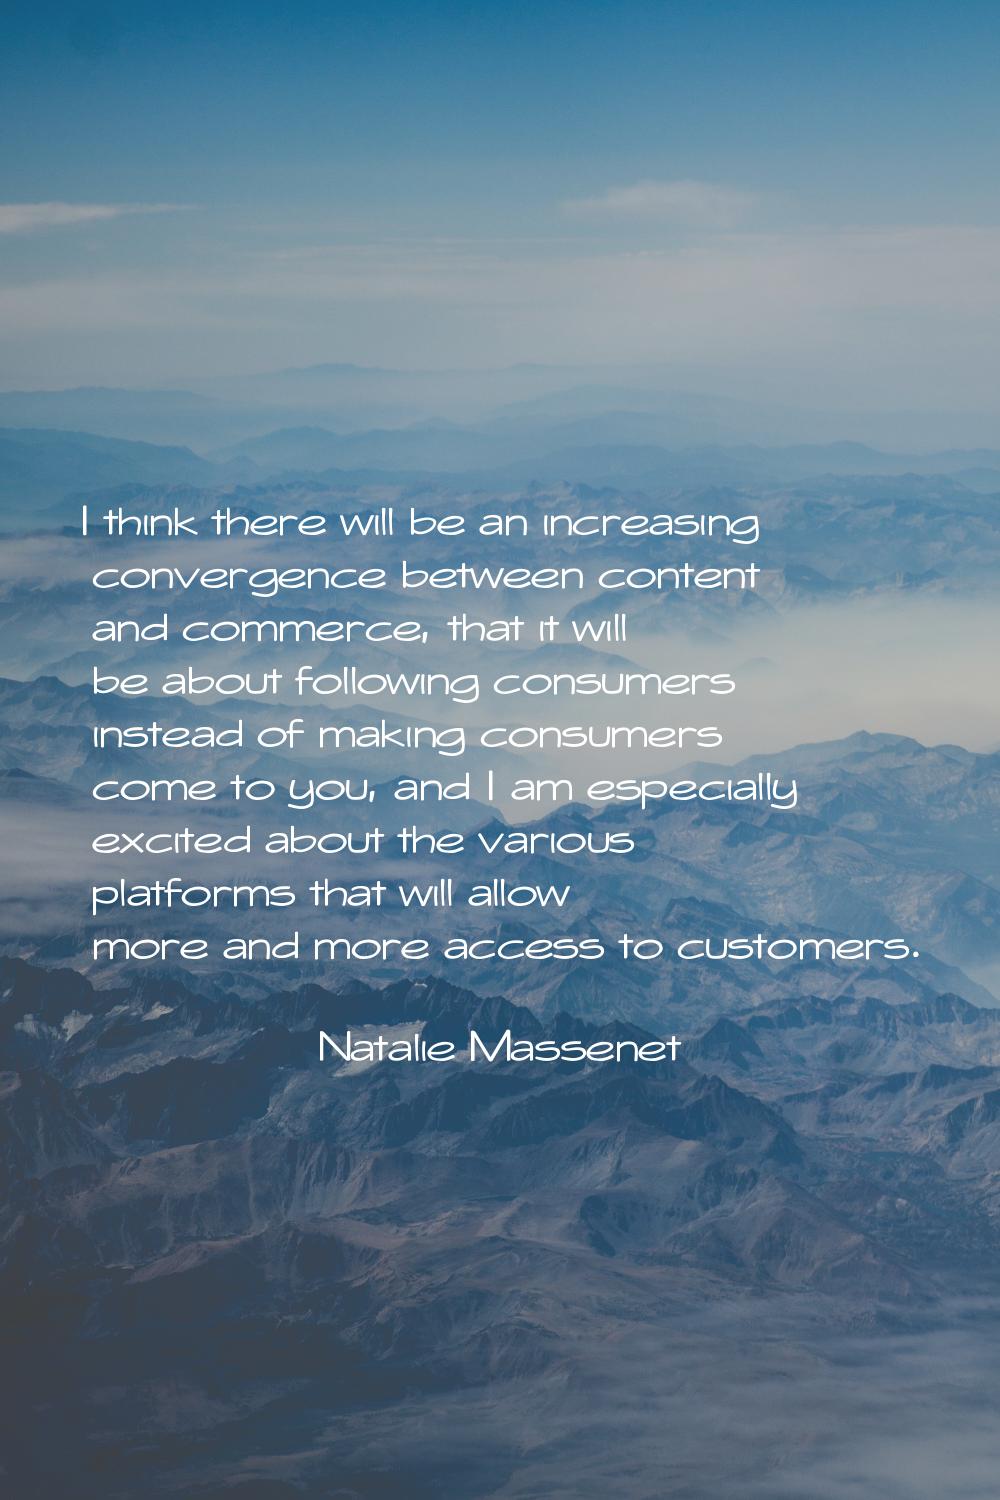 I think there will be an increasing convergence between content and commerce, that it will be about